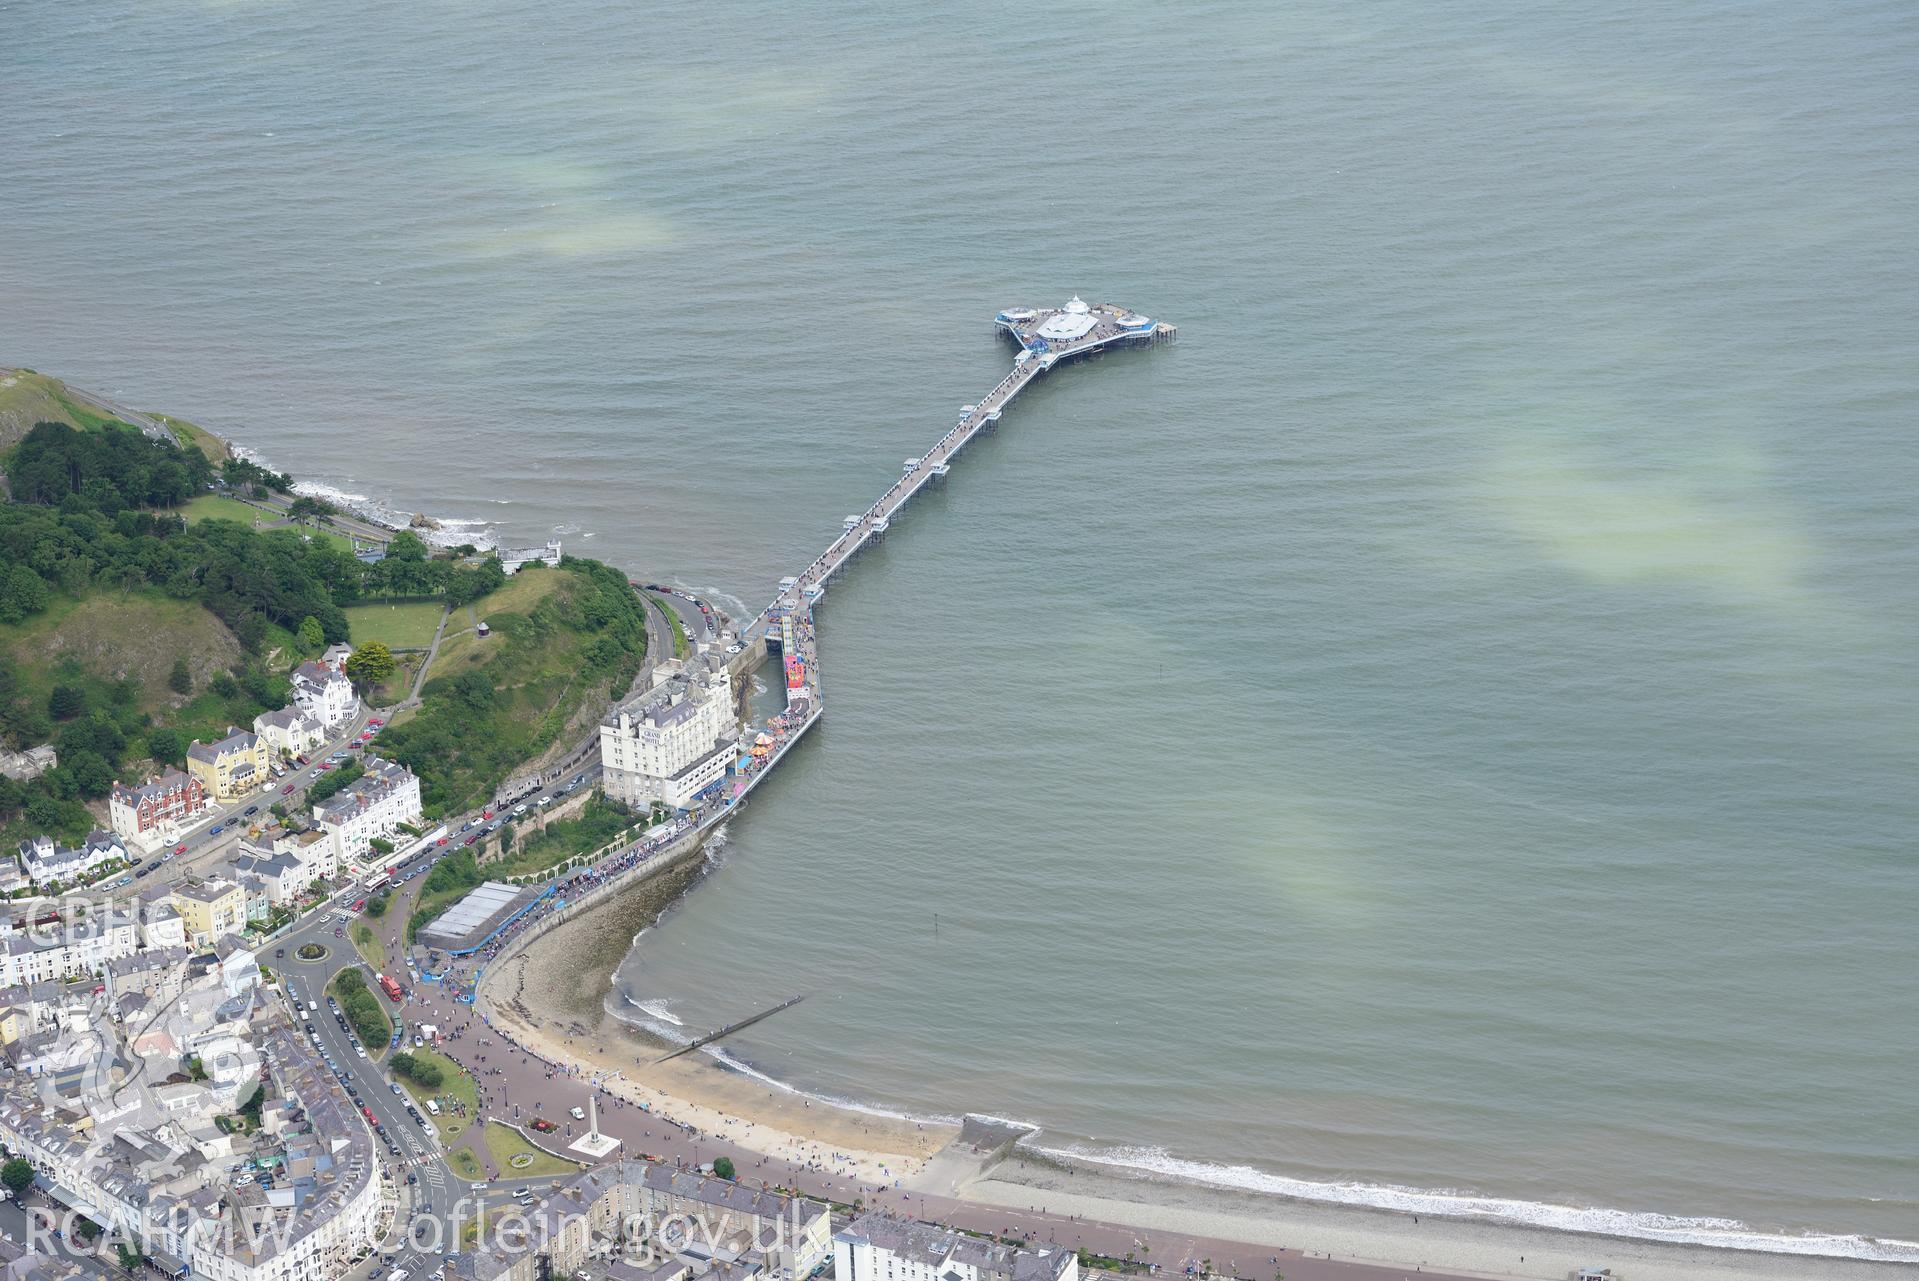 Llandudno pier and bar; cenotaph; Belmont Hotel, Headlands Hotel and Grand Hotel. Oblique aerial photograph taken during the Royal Commission's programme of archaeological aerial reconnaissance by Toby Driver on 30th July 2015.